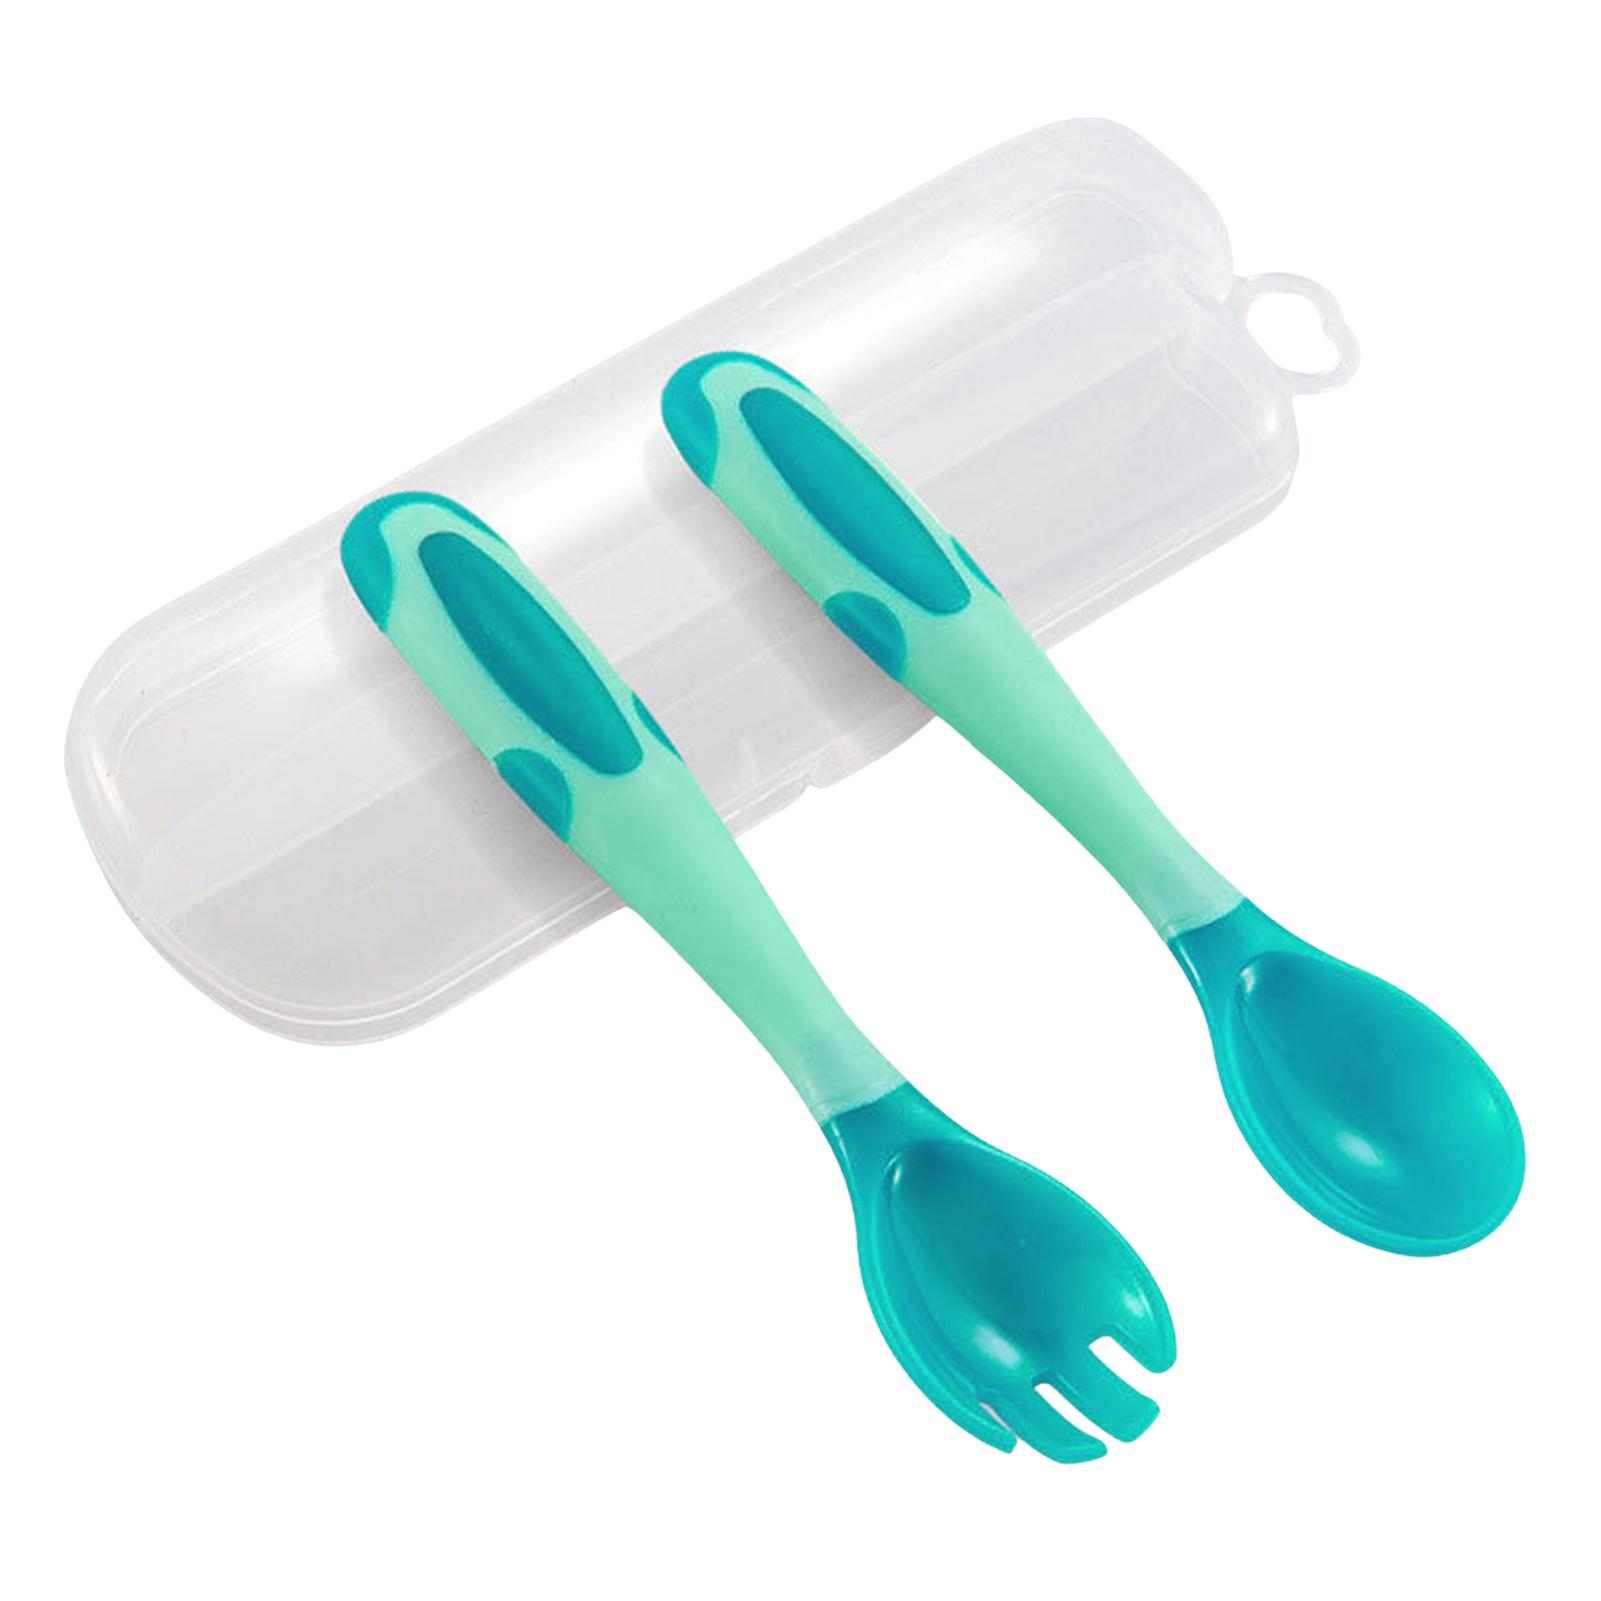 Temperature Sensitive Baby Spoon And Fork